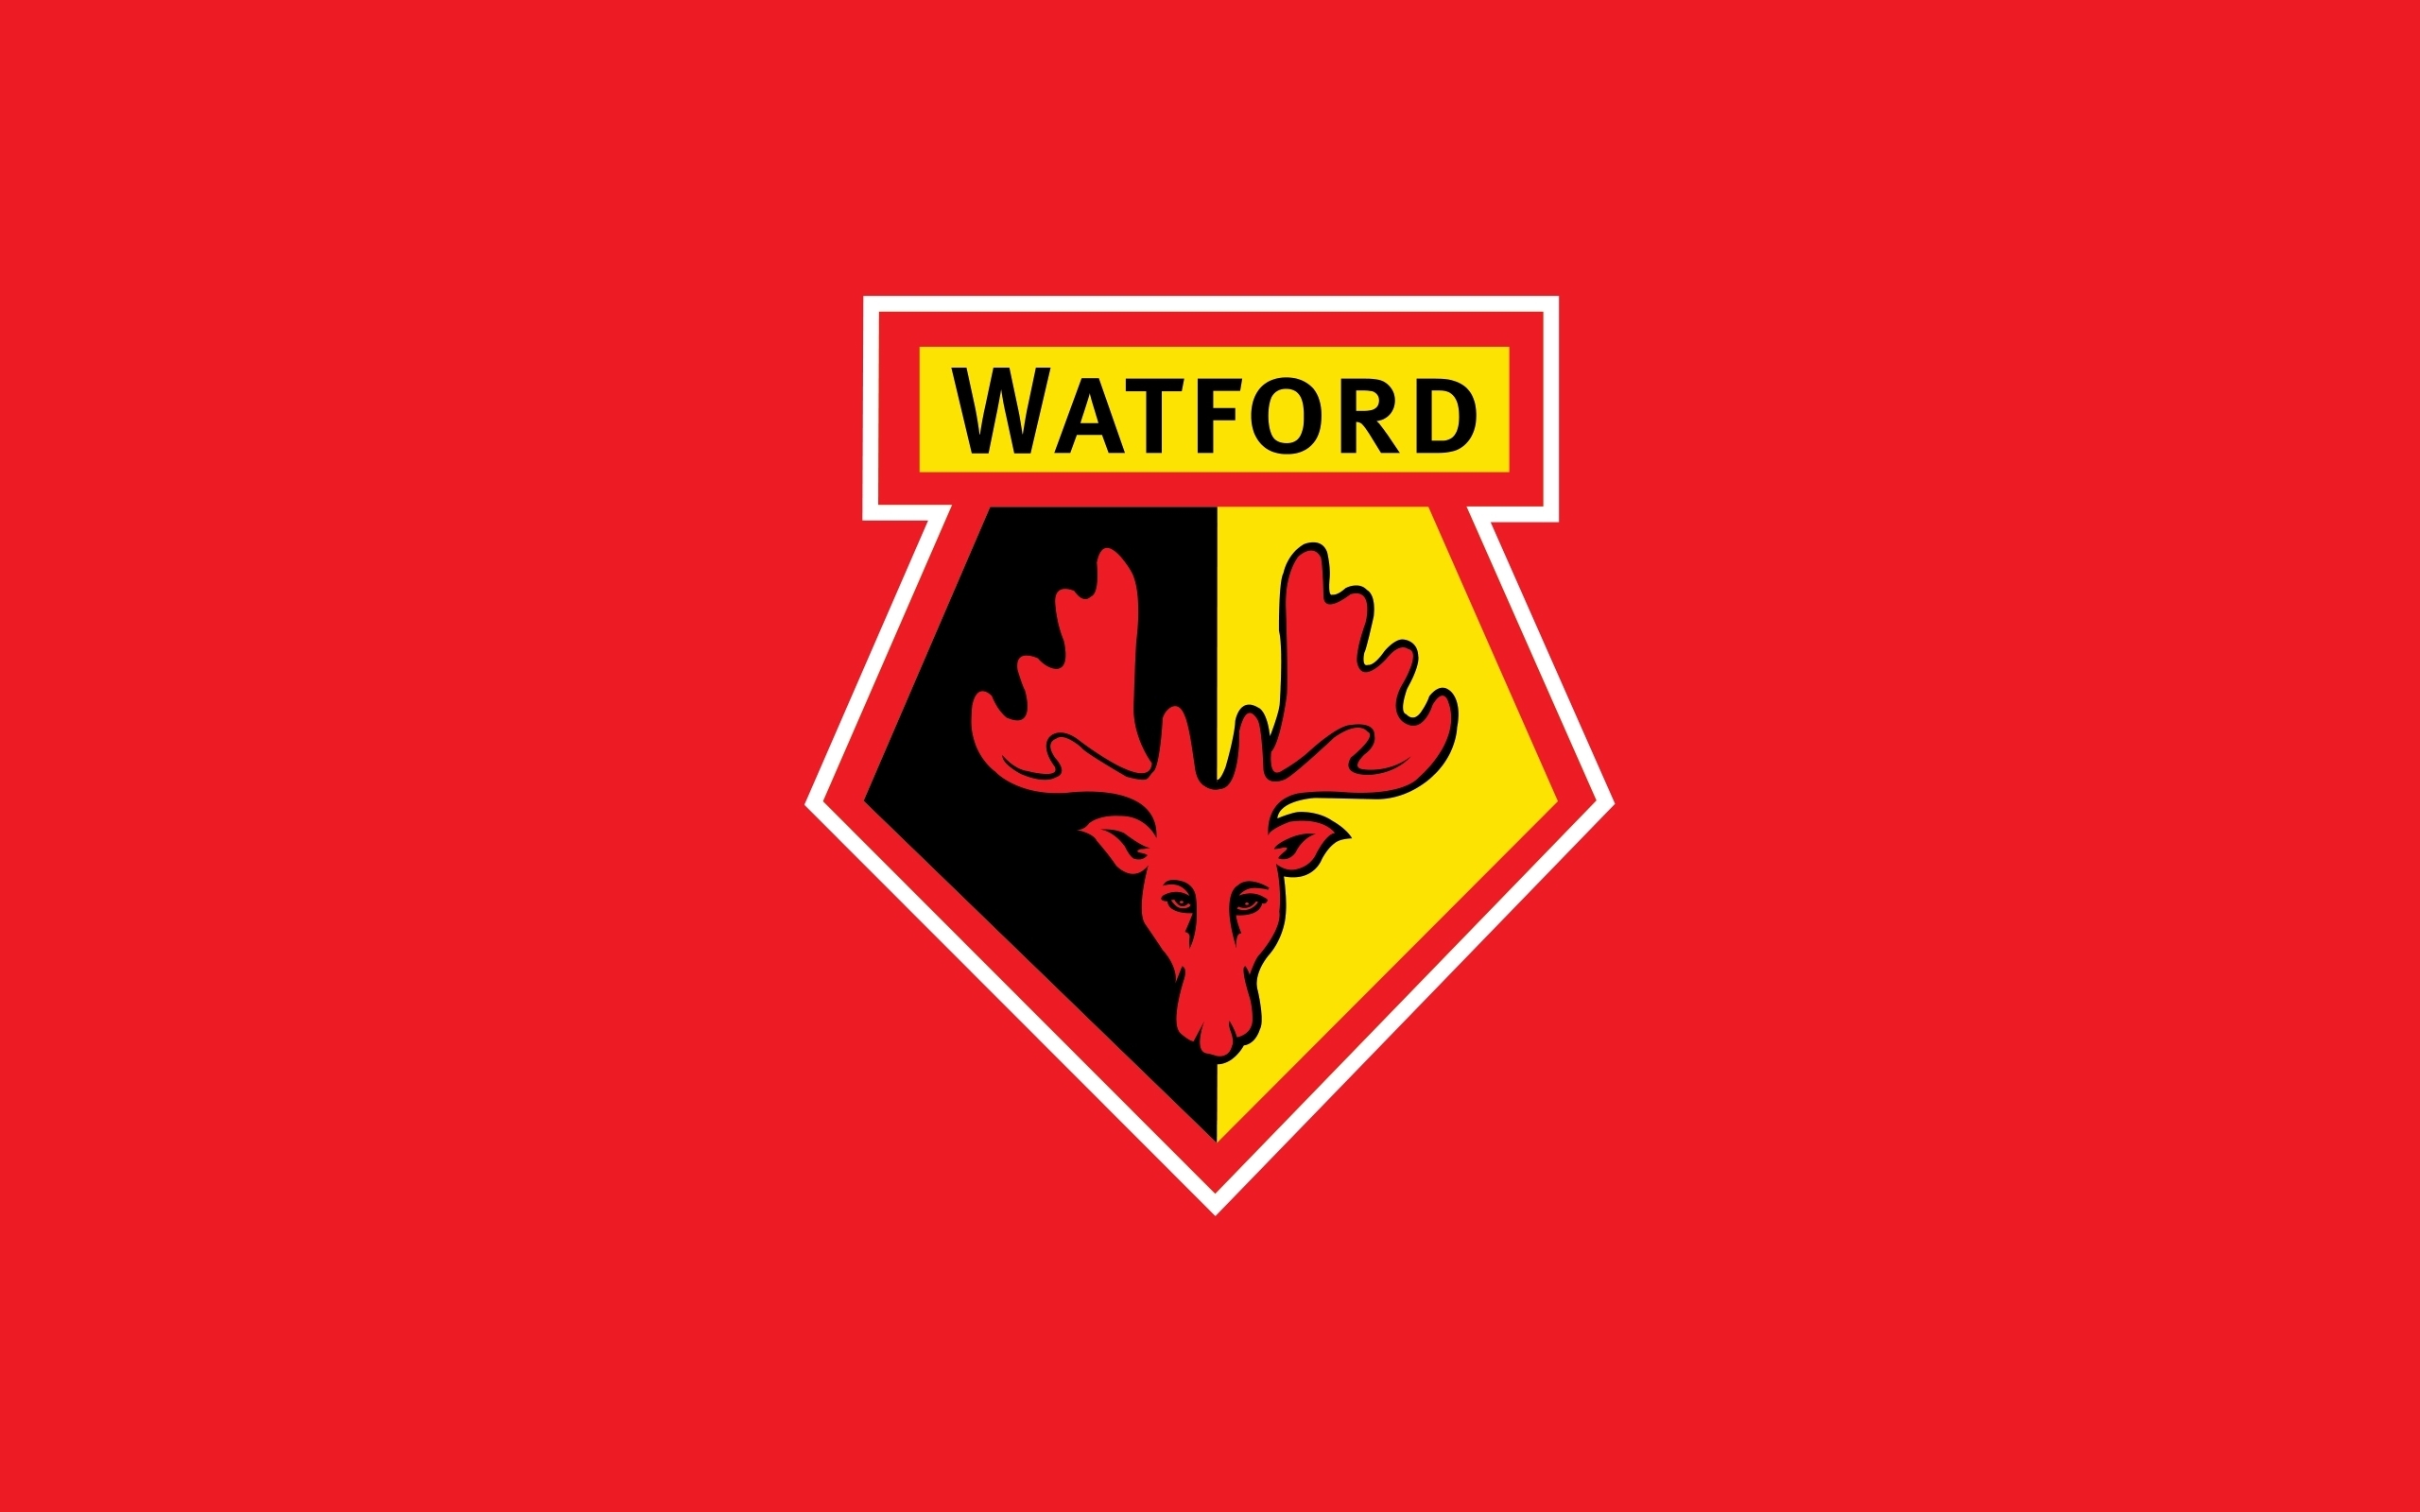 HD Wallpaper Of Watford Football Club S Logo With Red Background